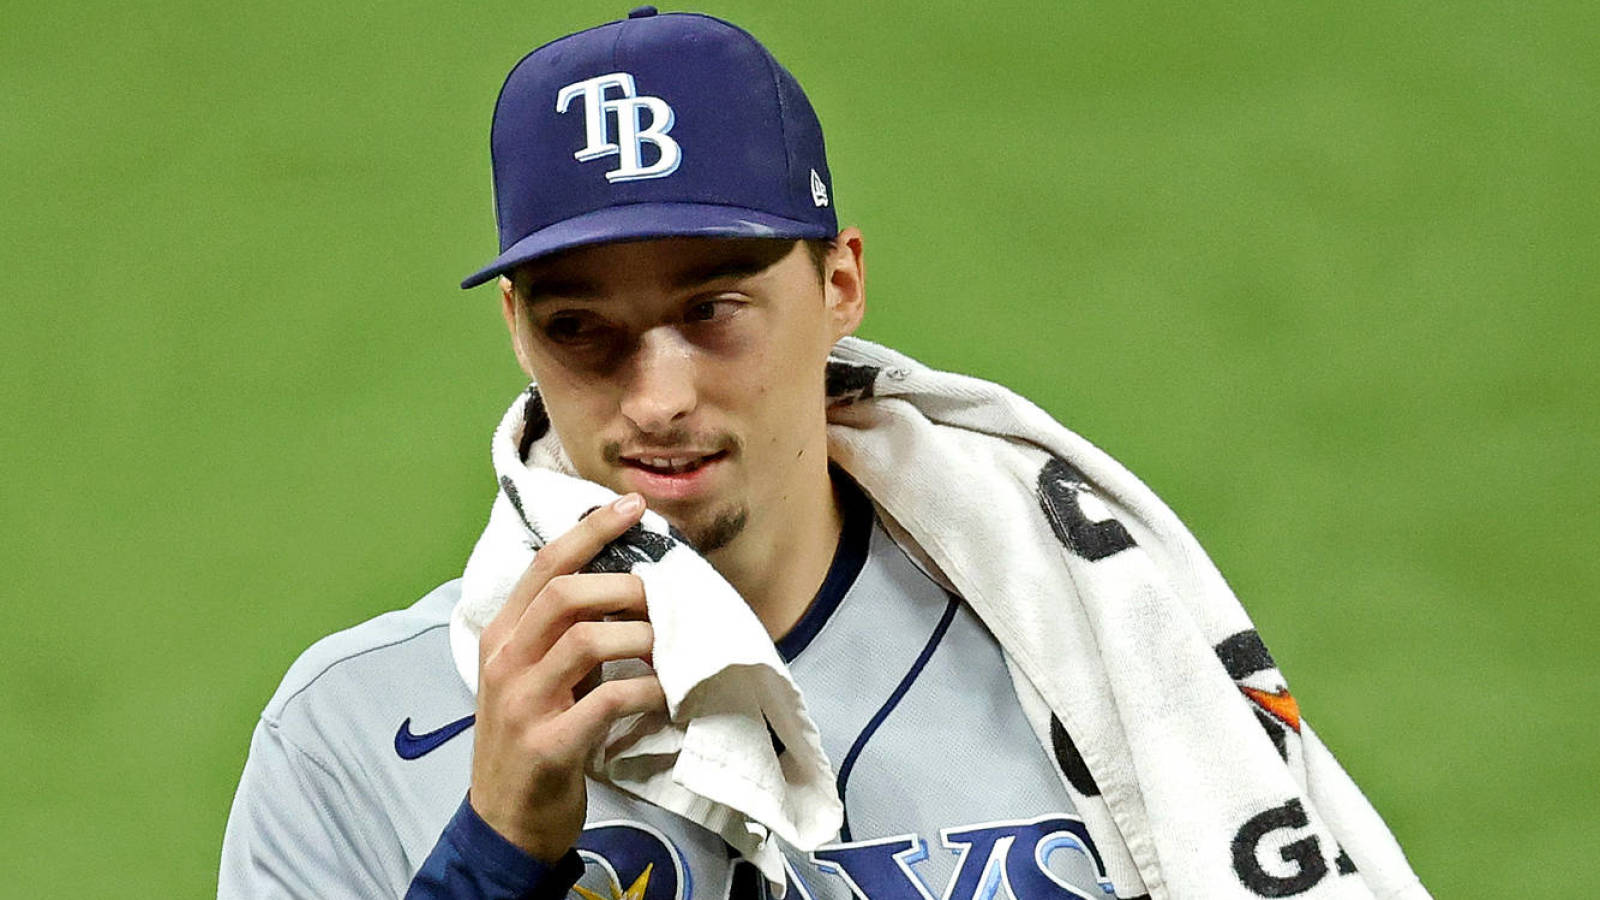 Blake Snell Traded To The Padres